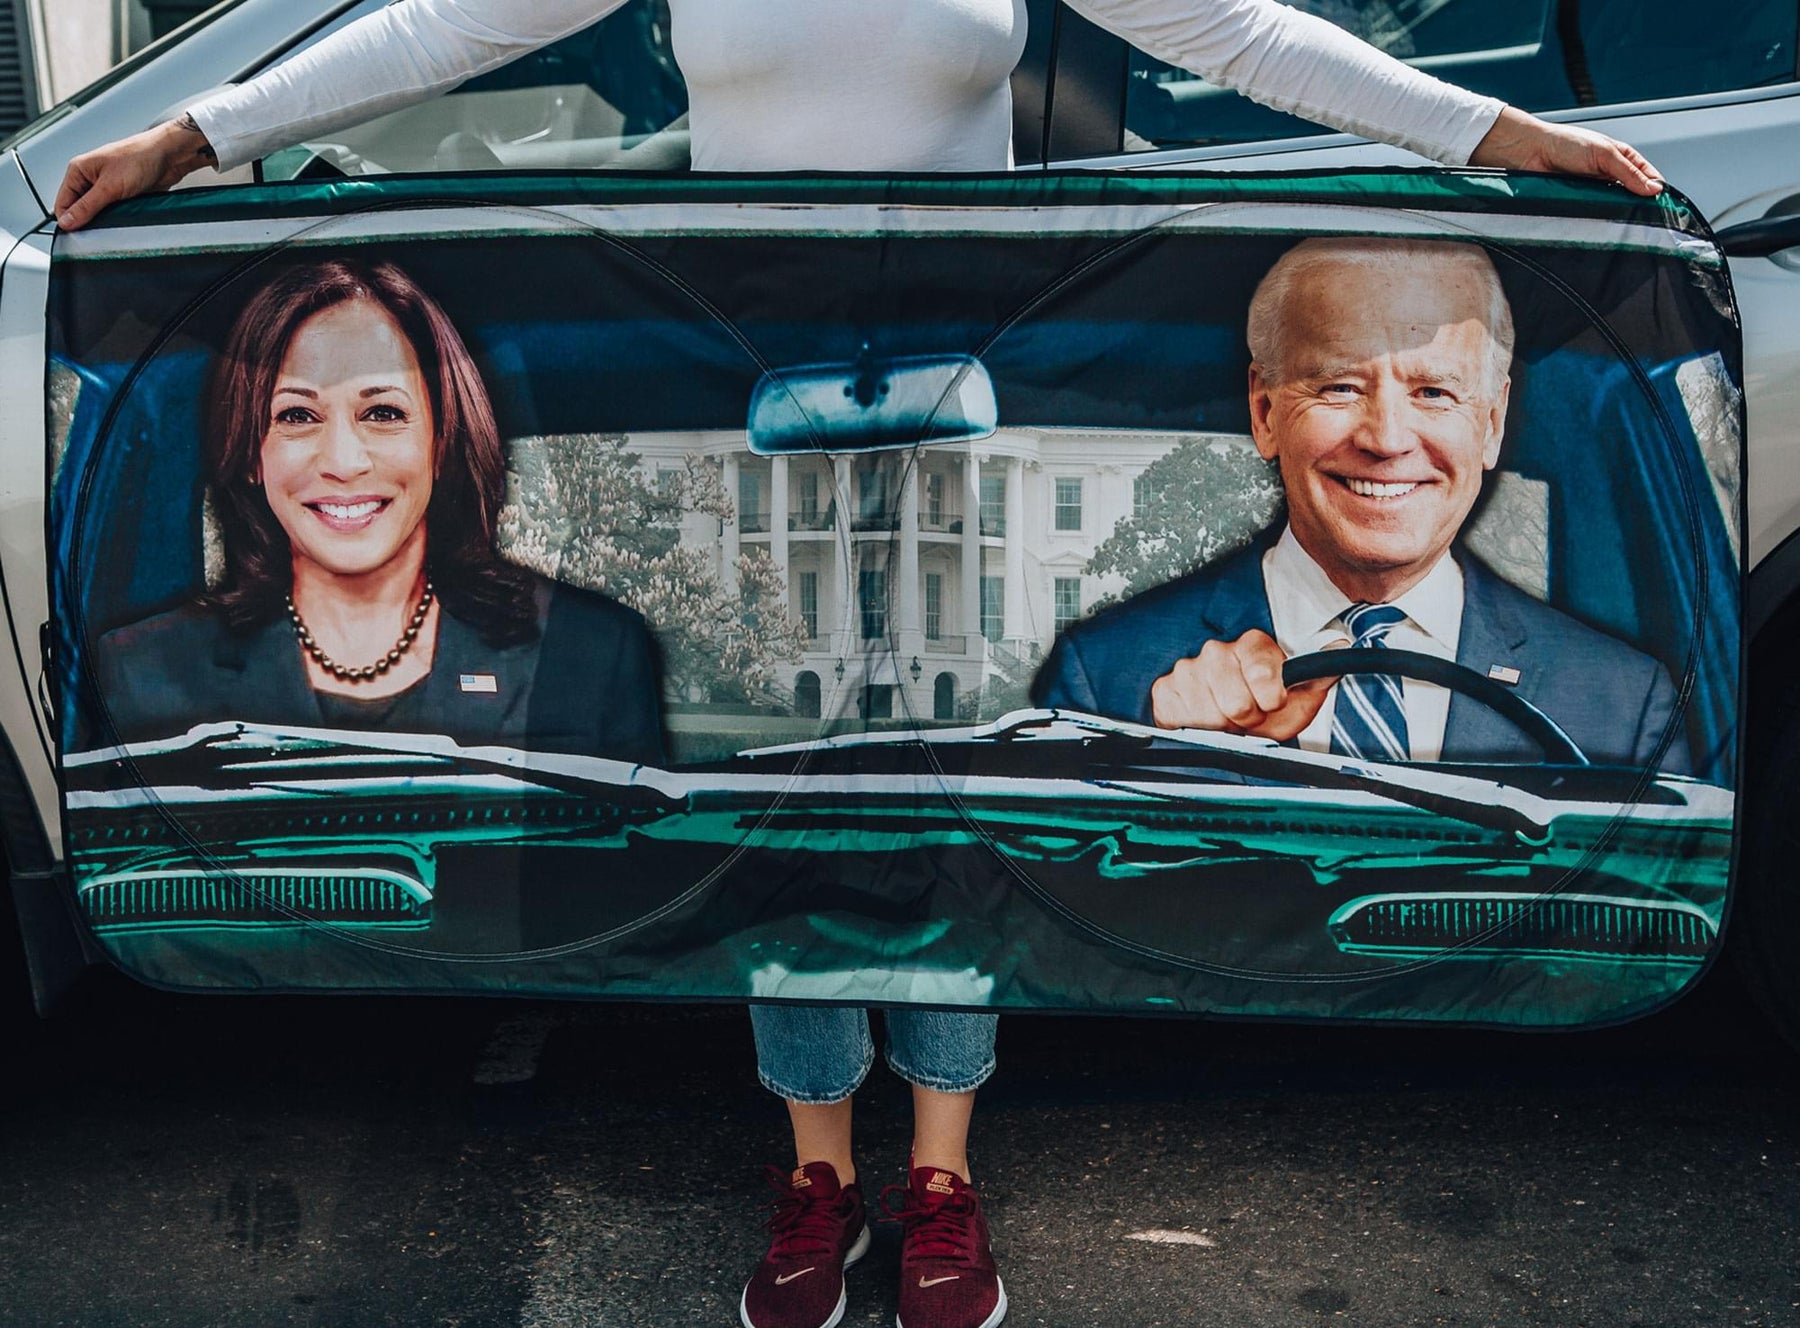 President Biden and VP Harris Sunshade for Car Windshield | 64 x 32 Inches